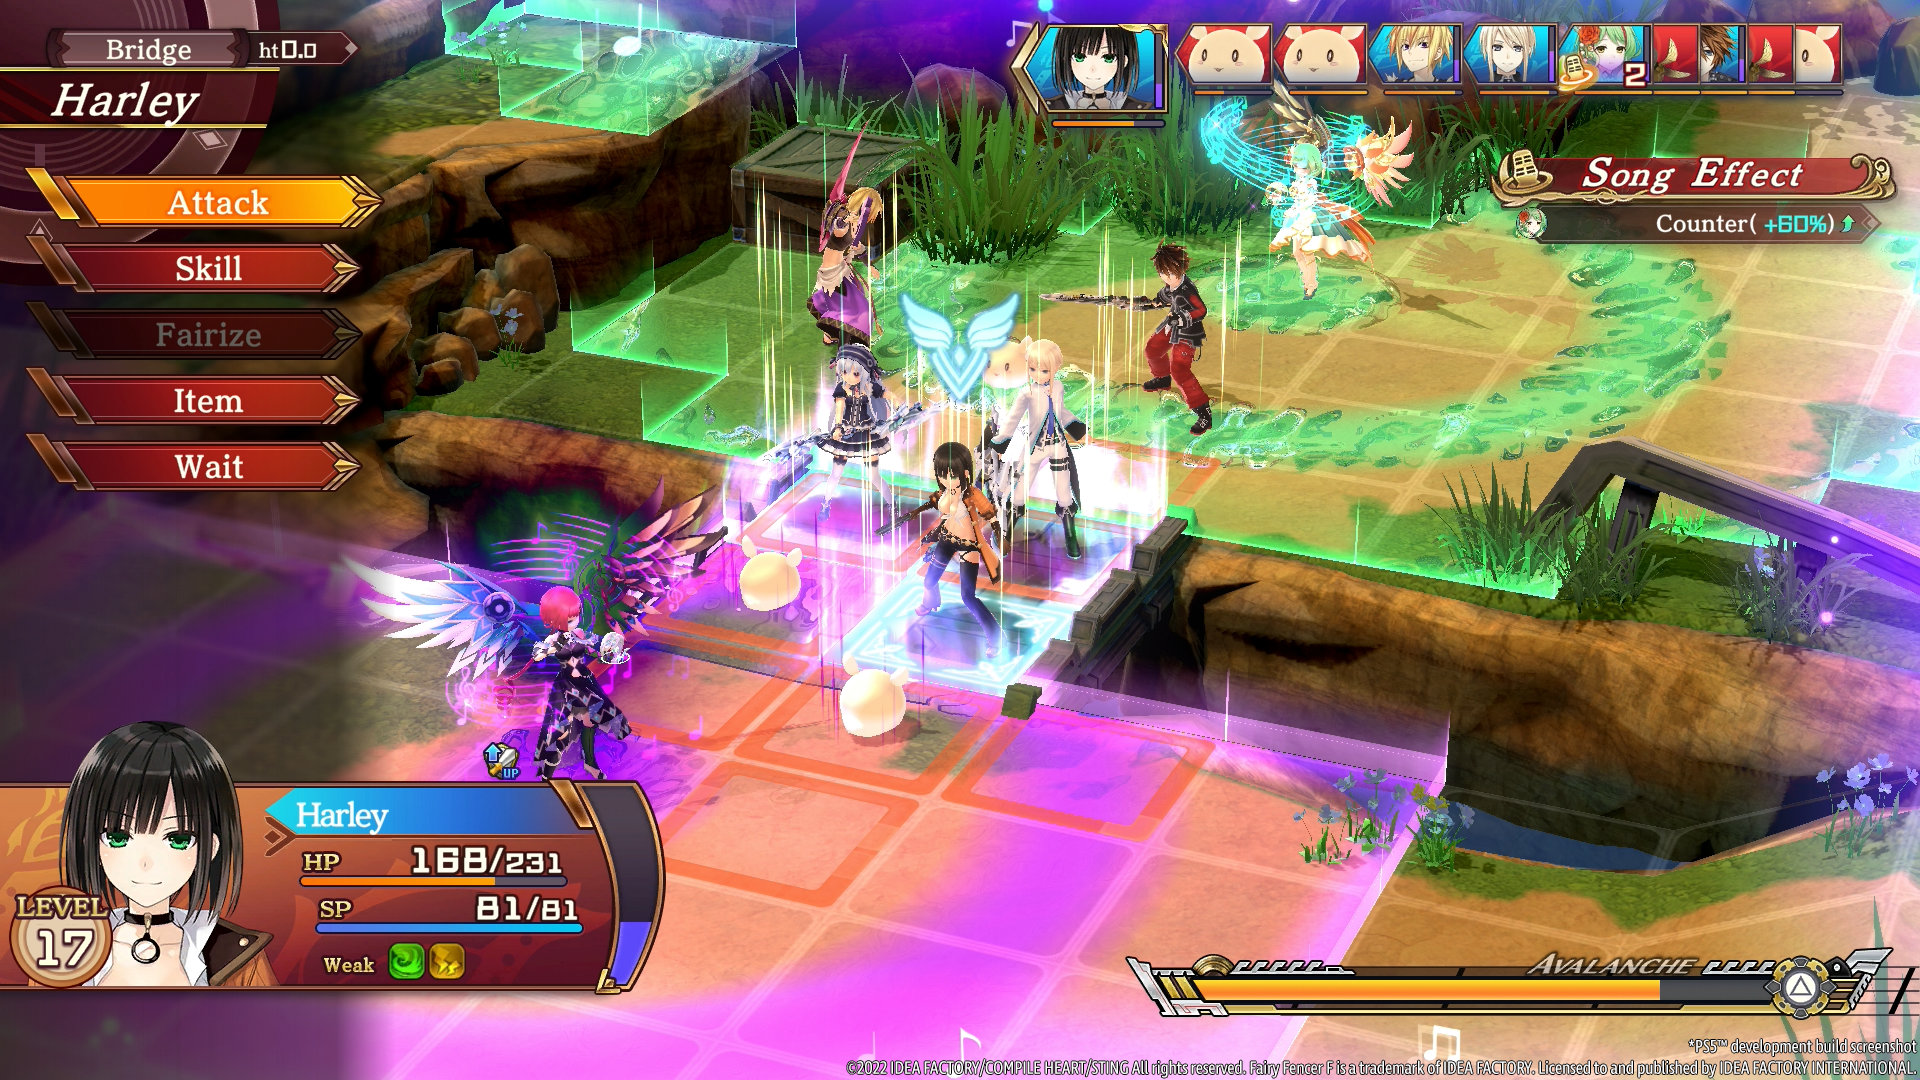 Fairy Fencer F: Refrain Chord Screenshot of a grid-based battle between several party members and enemies